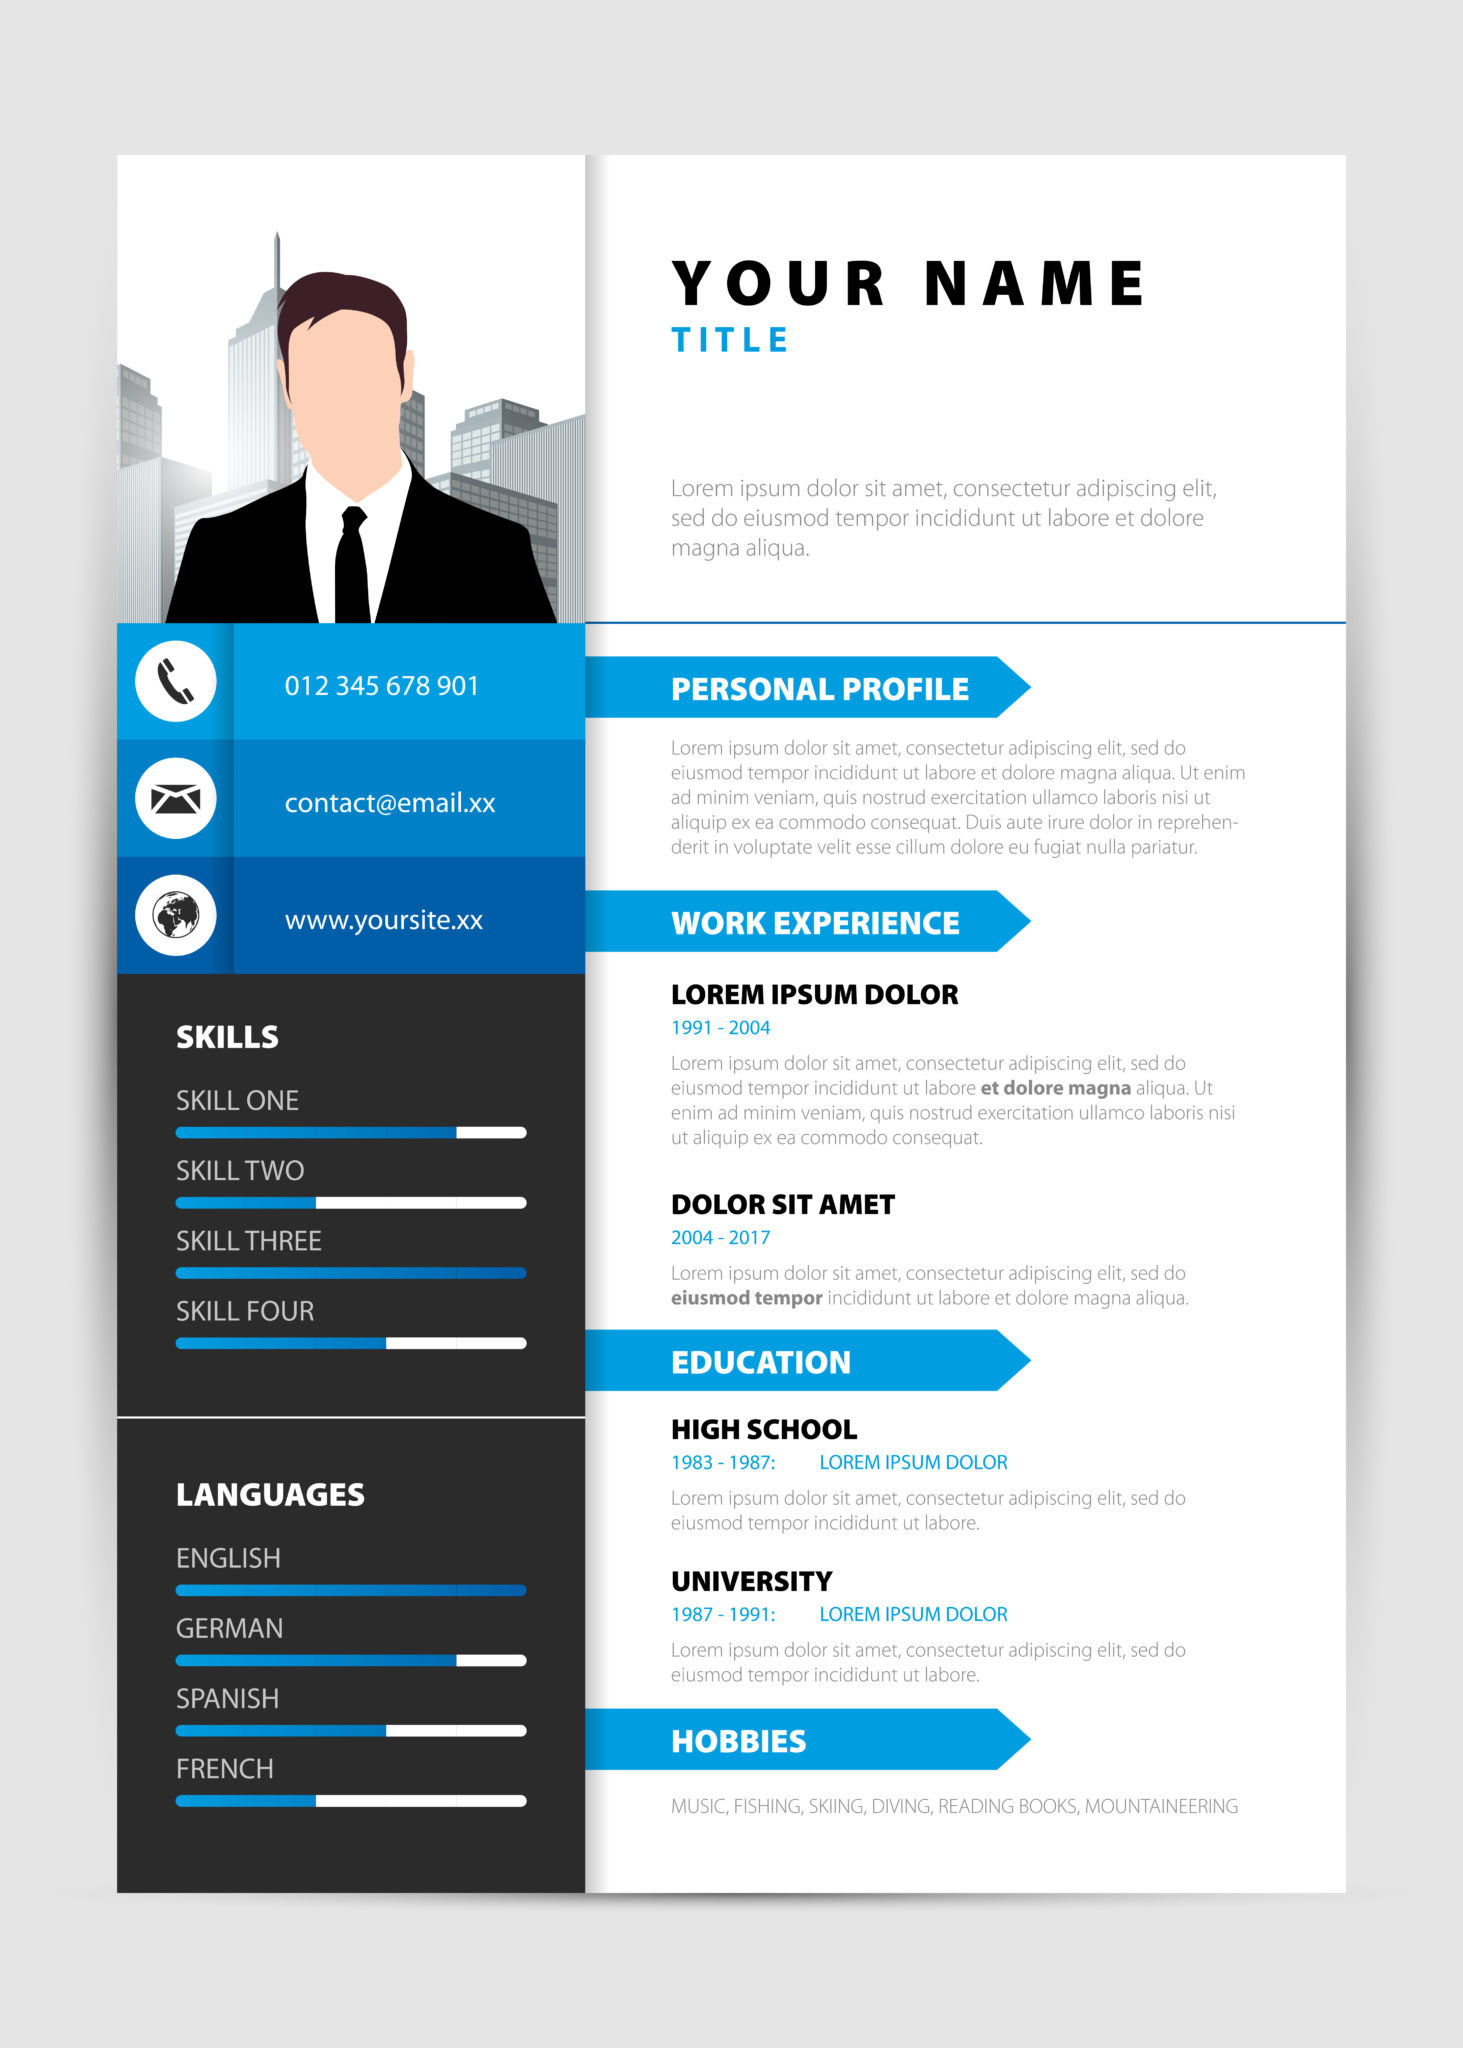 Sample Resume for Aws solution Architect associate Aws Resume How to Make Your Resume Look attractive Edureka